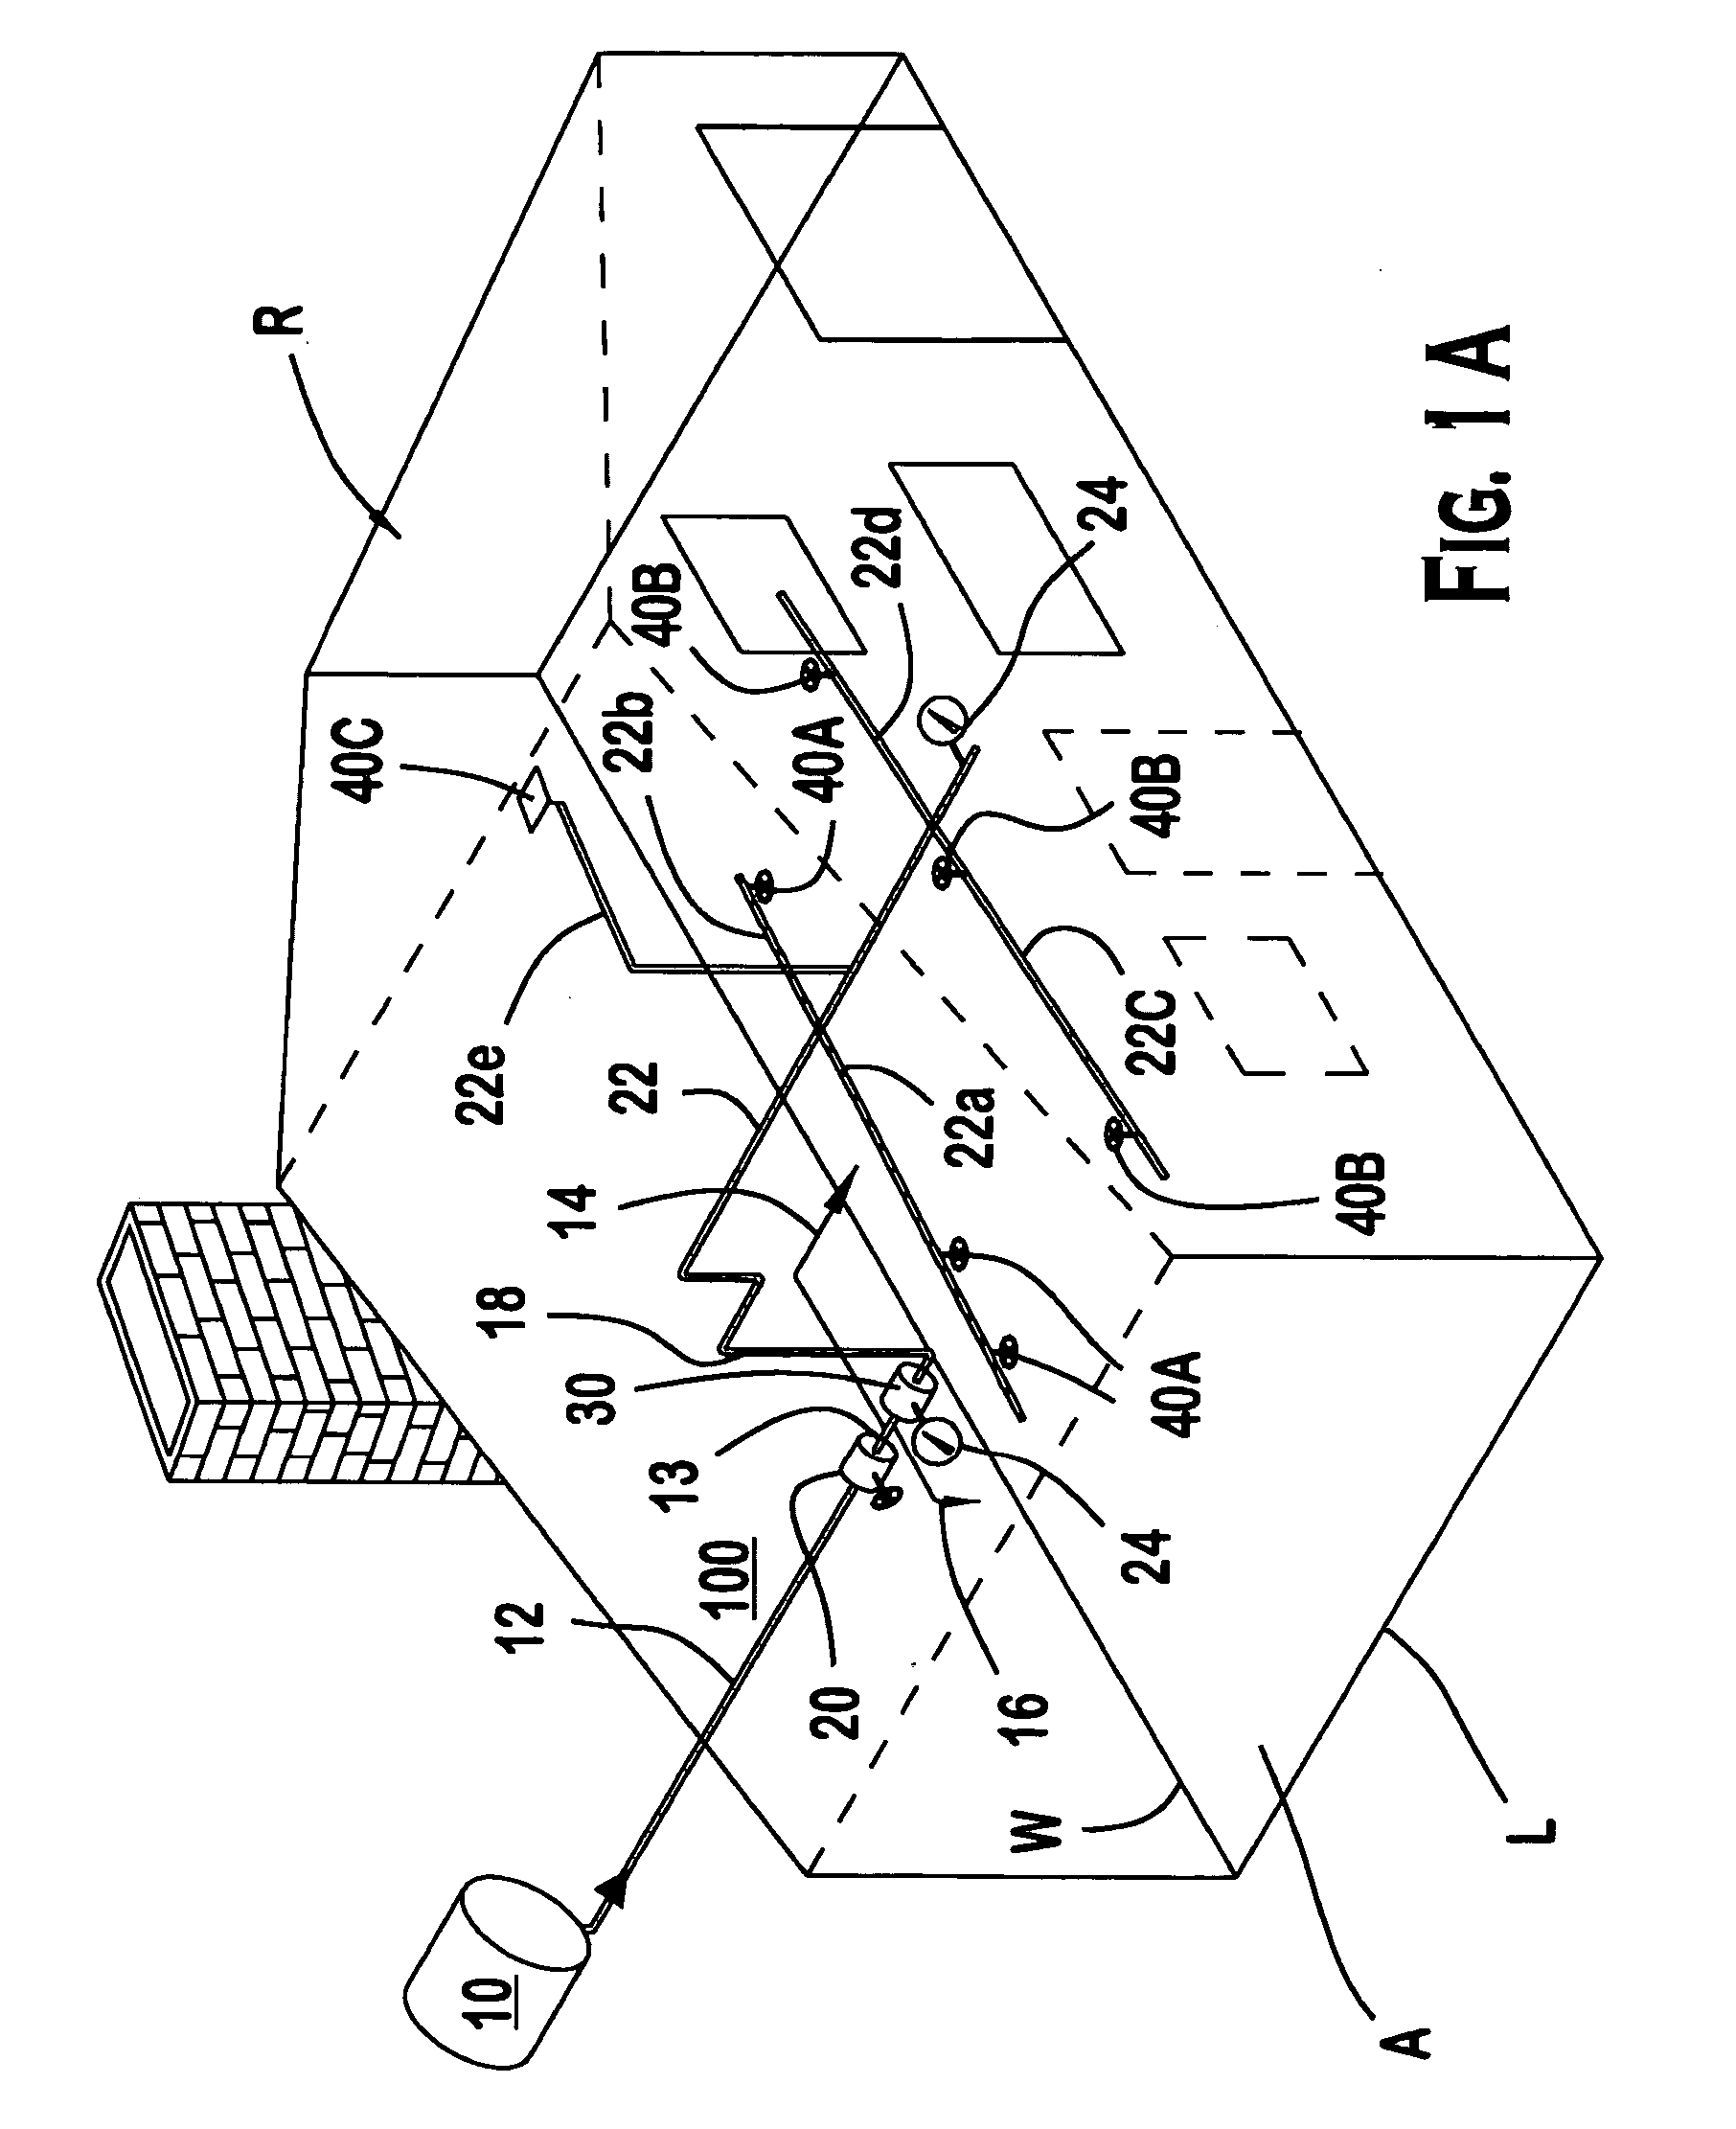 Non-interlock, non-preaction residential dry sprinkler fire protection system with a releasing control panel